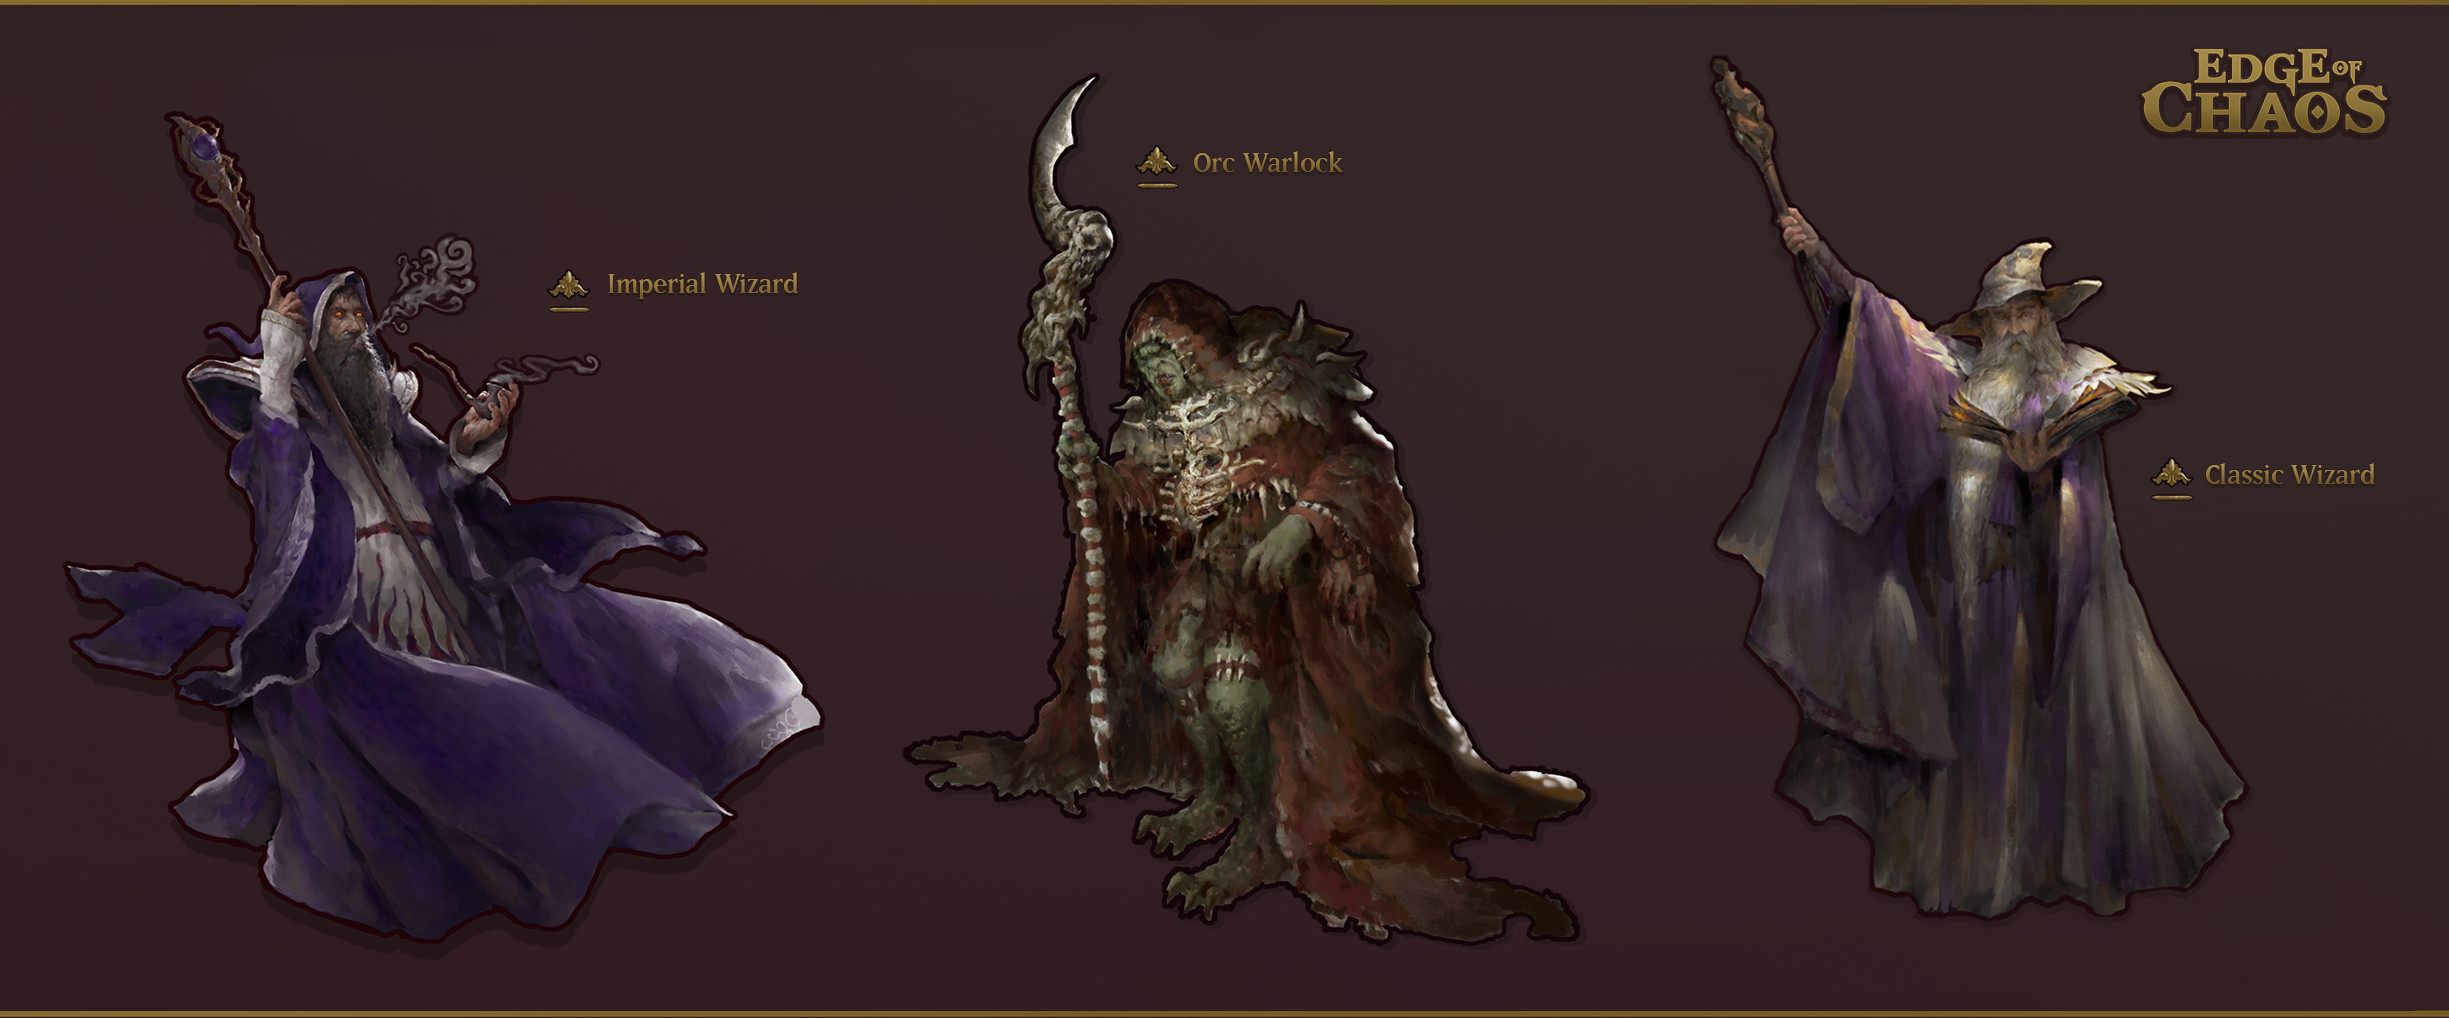 Some of the select concepts I created for the Edge of Chaos game. The game originally started out as an RTS, so the humans had to wear purple - representing the player color.